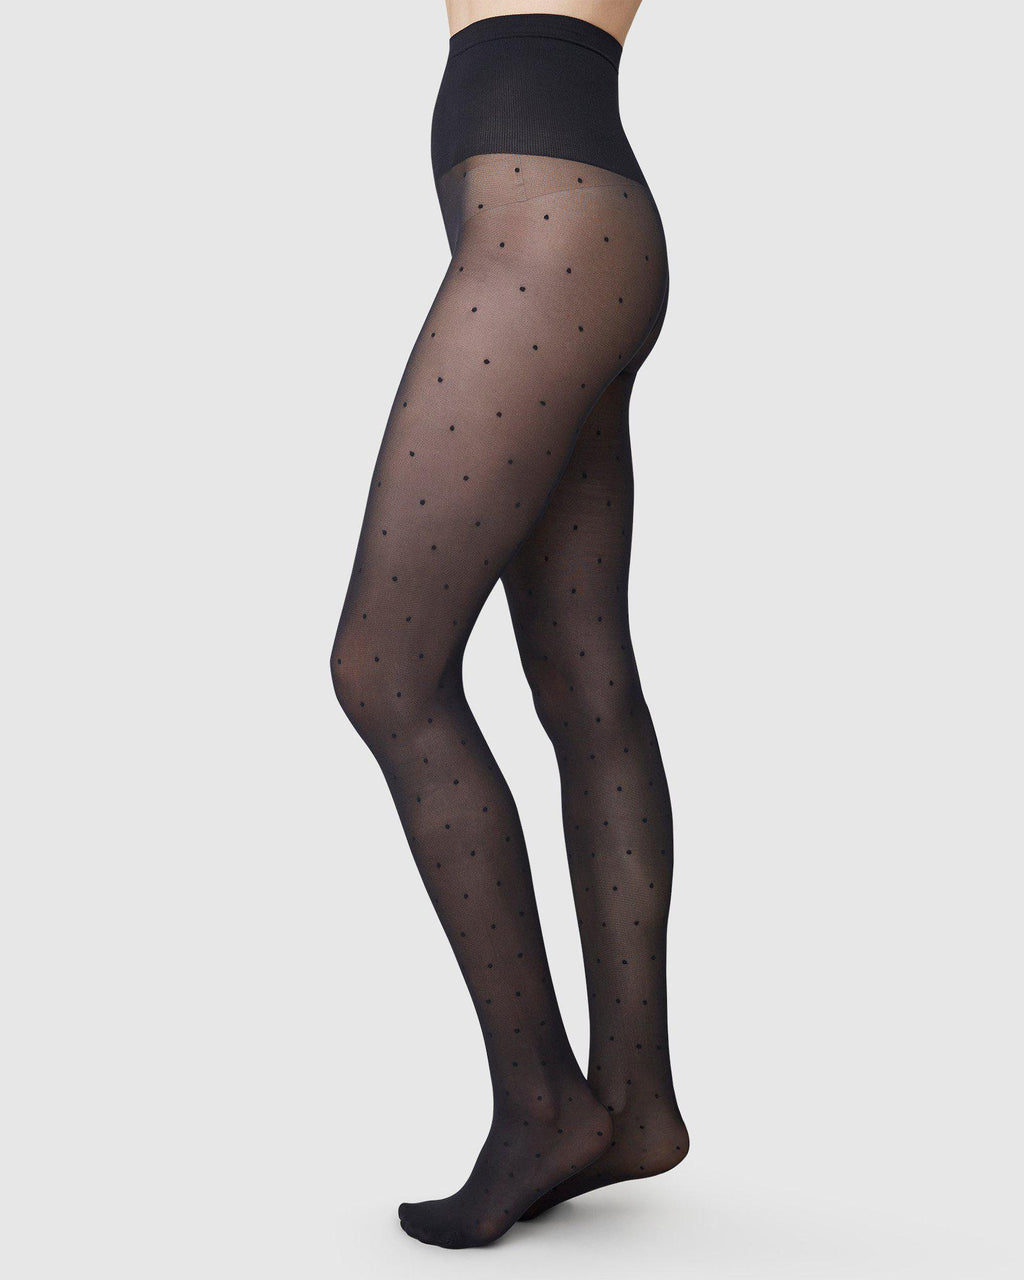 Style 110 warm tights in black with grey dots